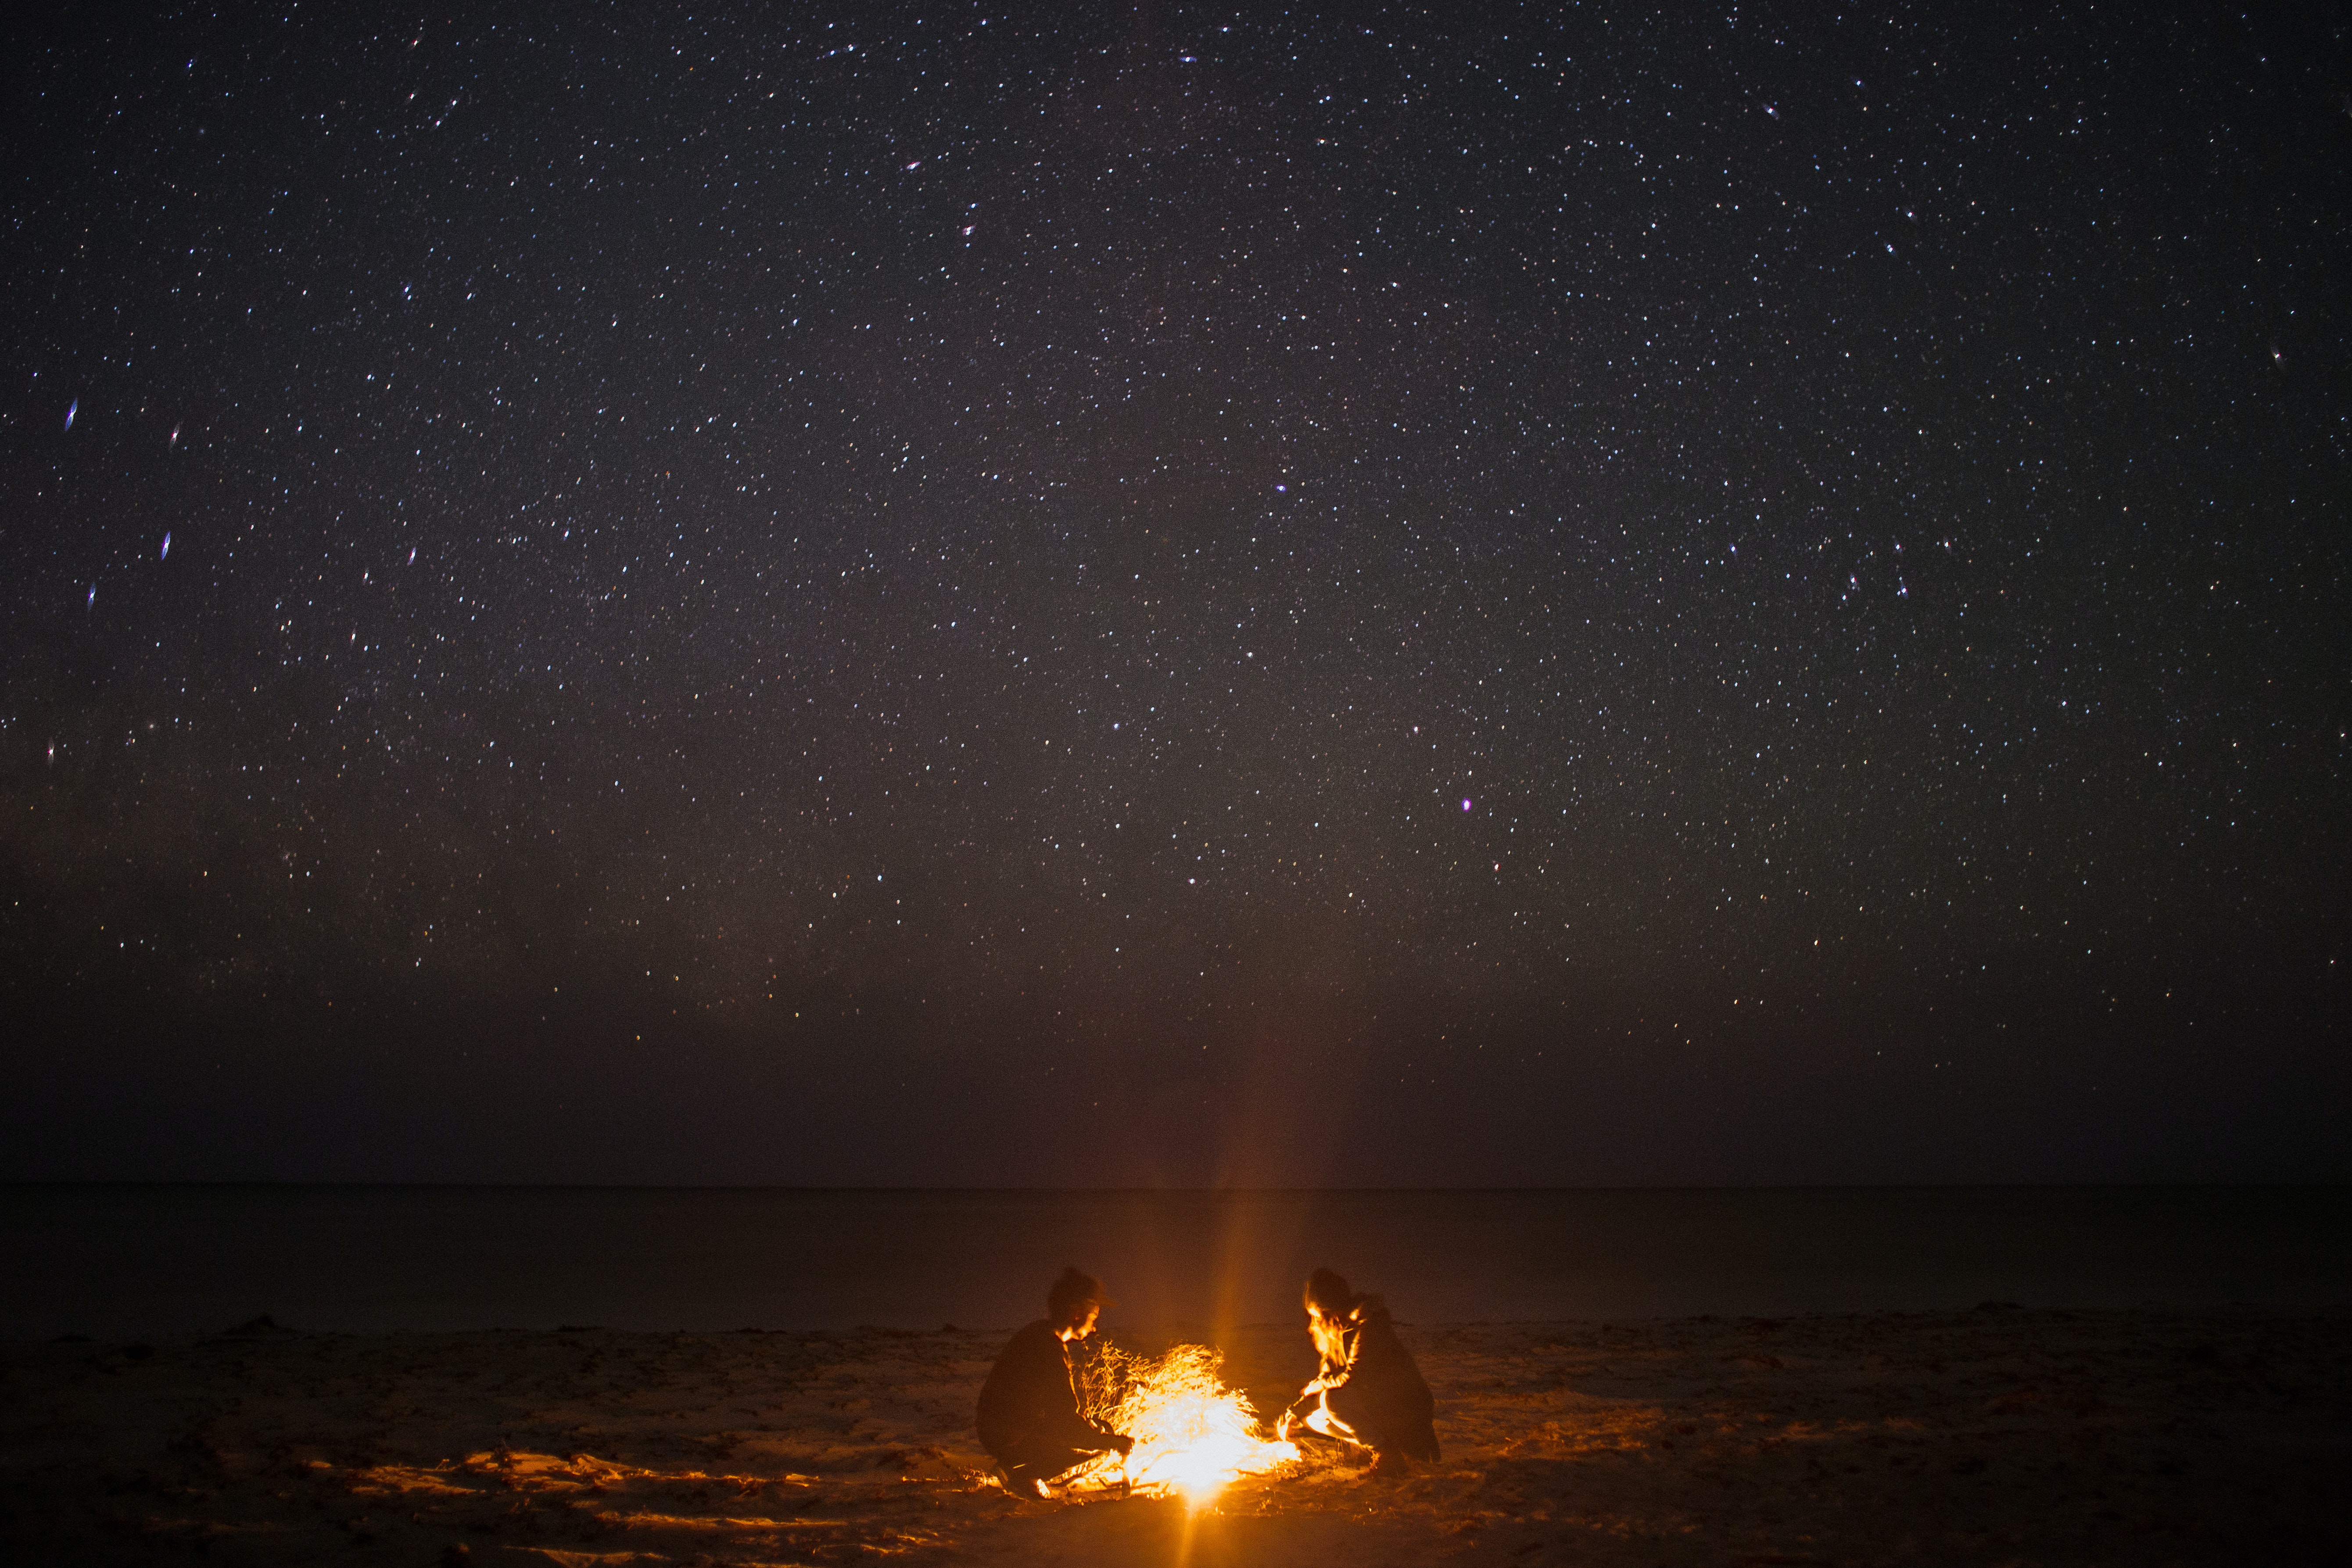 A couple sitting on the beach by a fire. | Source: Pexels